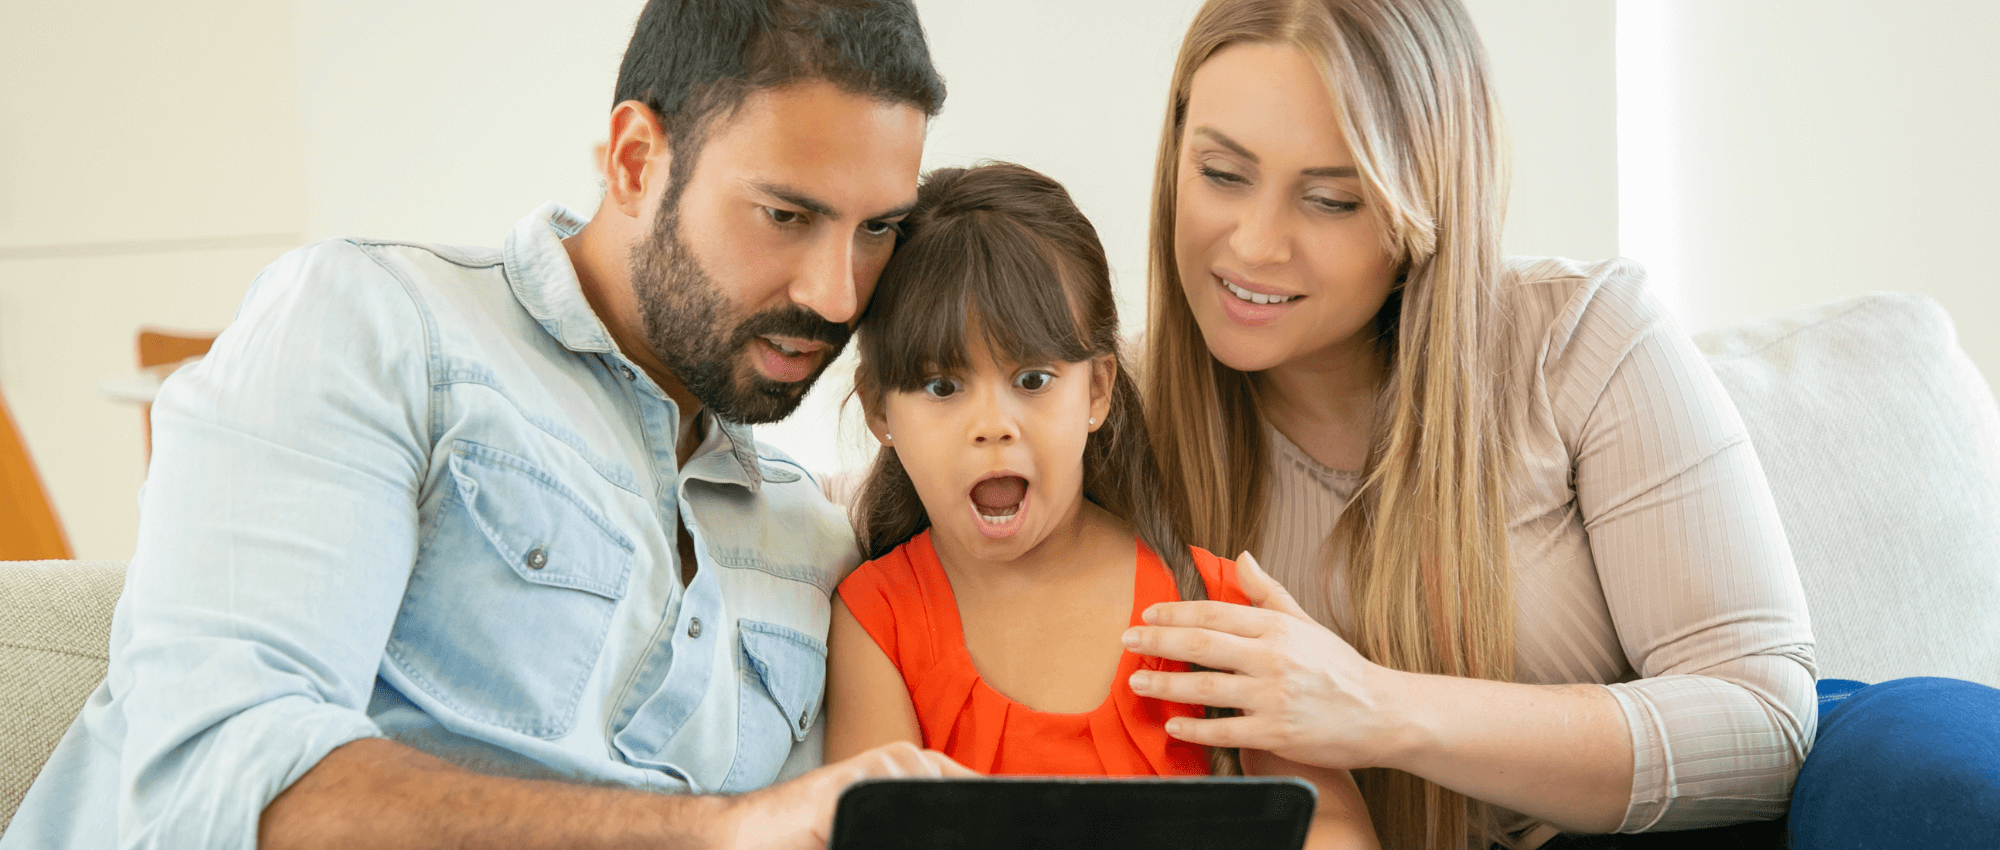 parents and child on tablet